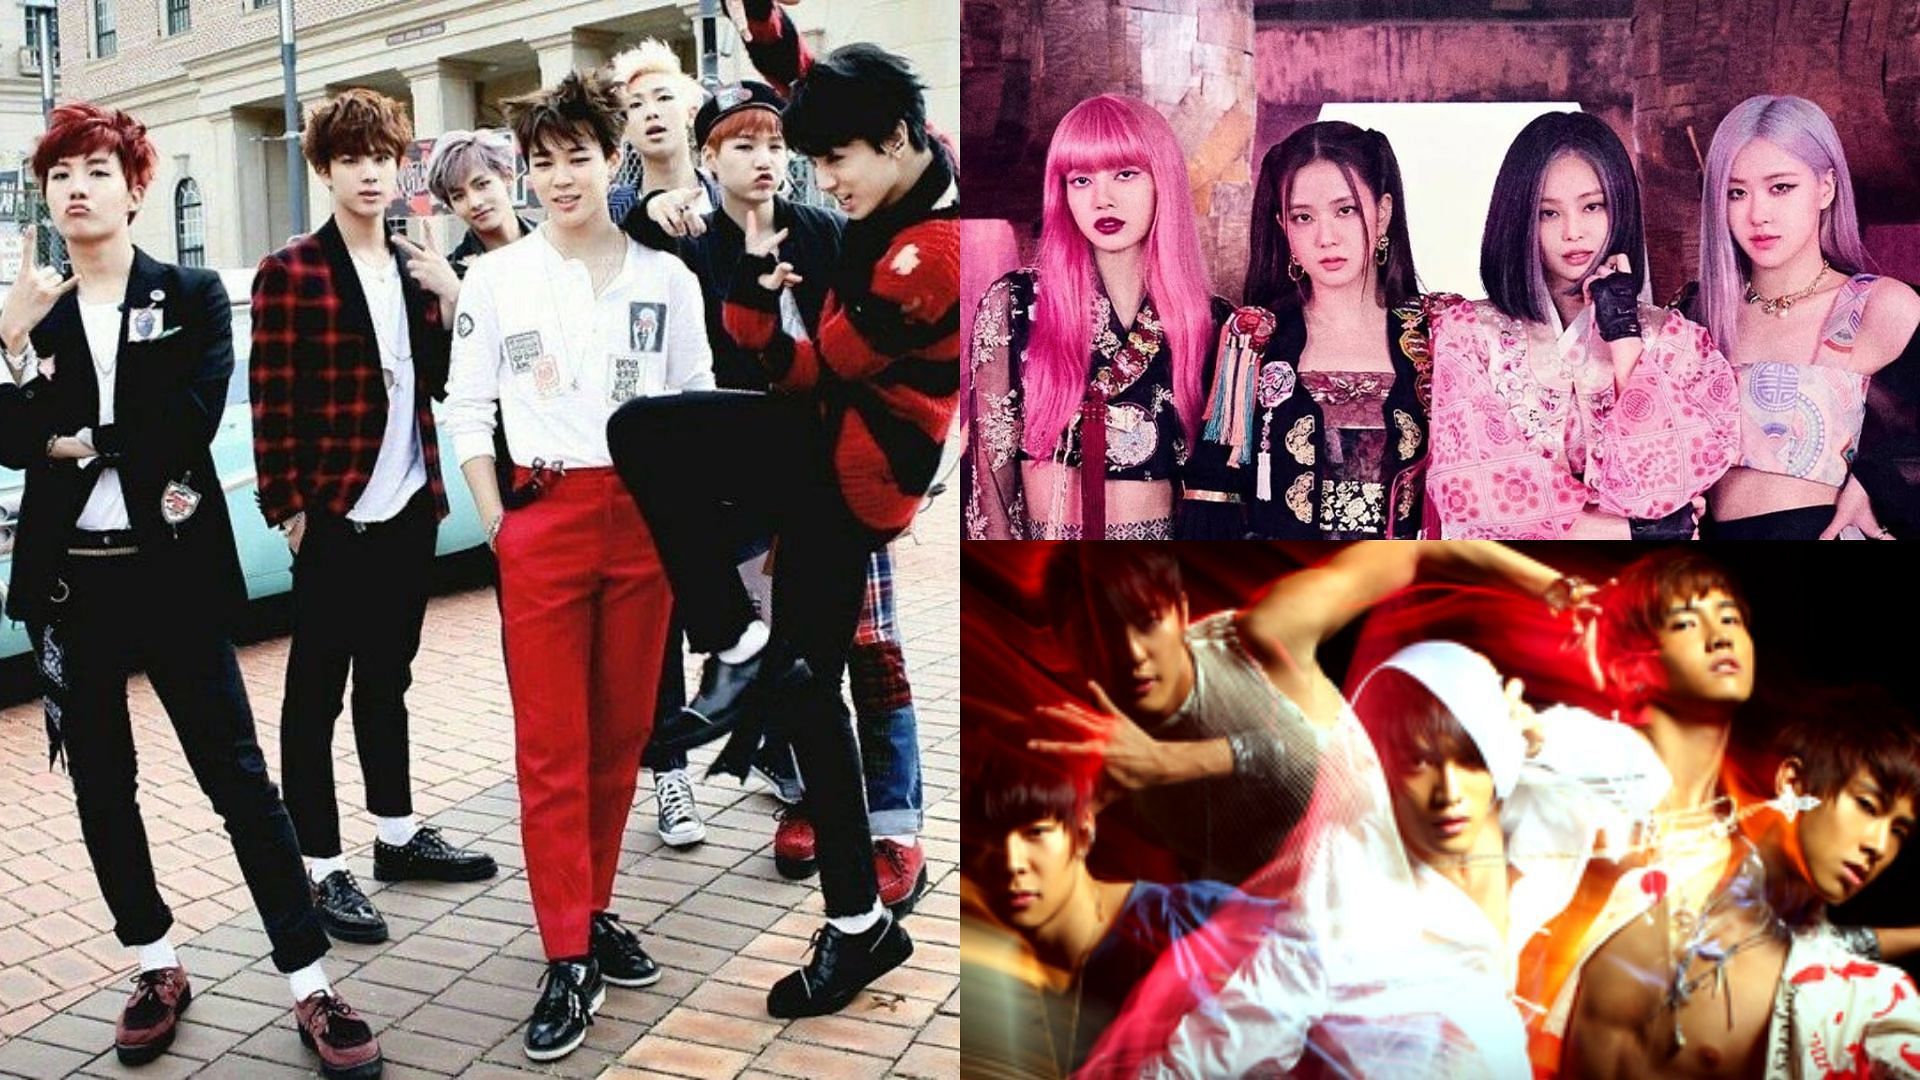 Some controversial K-pop songs feature well-known groups that had to make changes to the audience. (Images via Twitter/ @T4EHYUNGSE0K, @npomvtt, and @houseoftvxq)